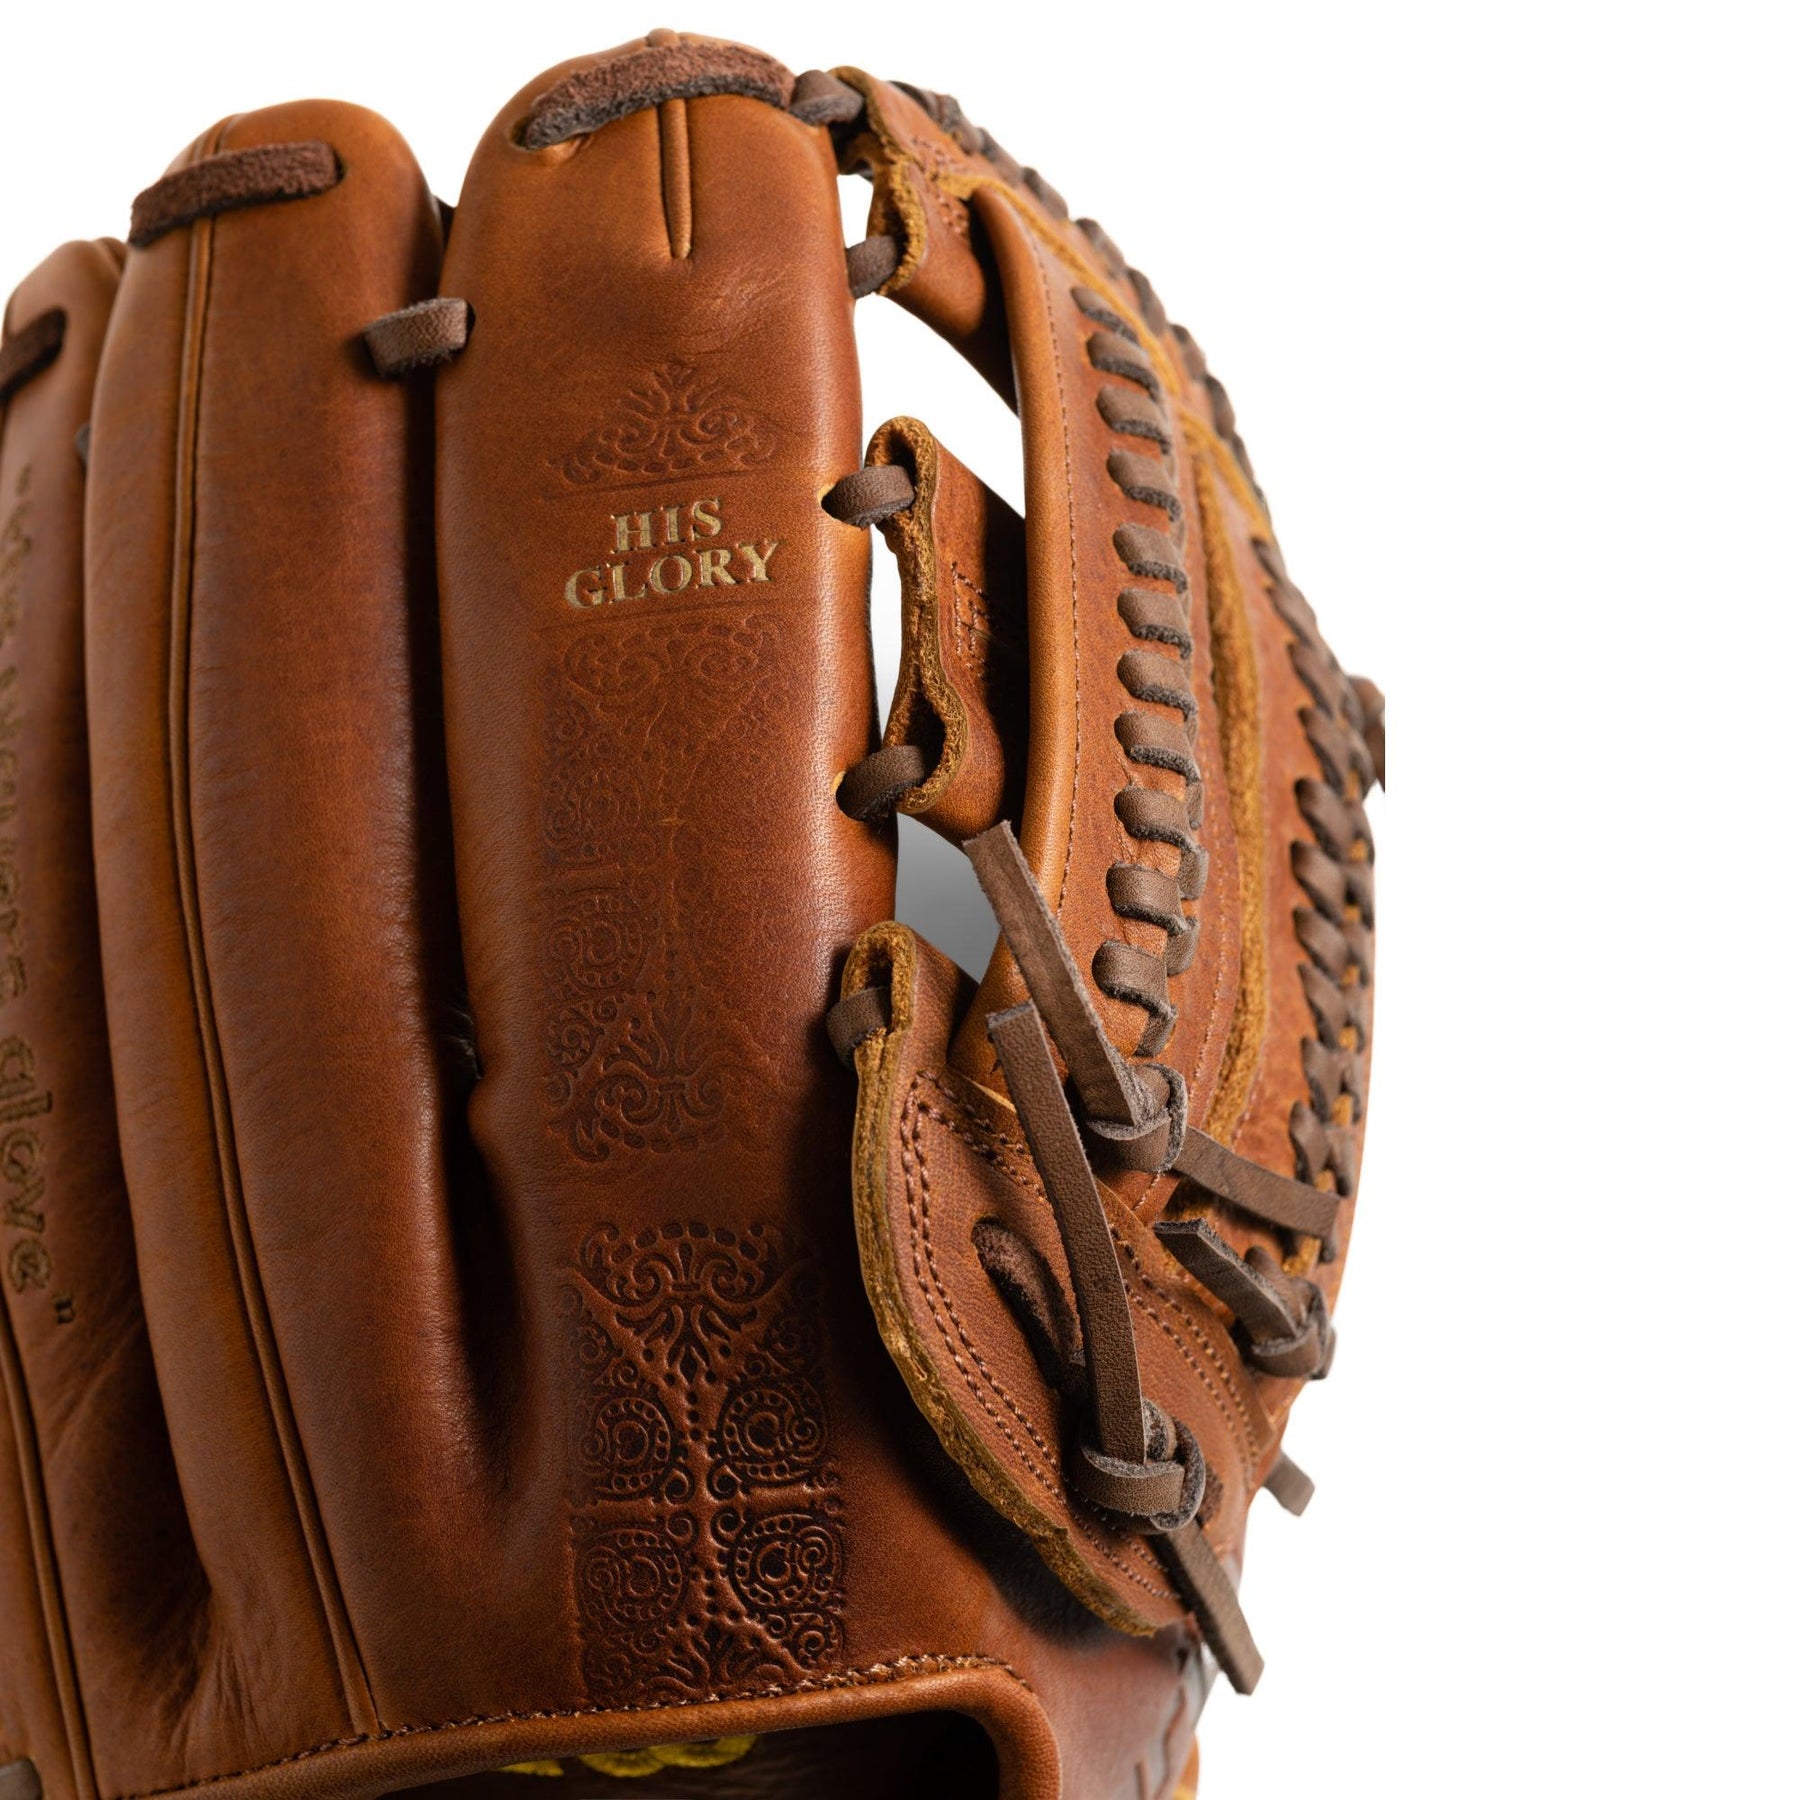 bible glove - baseball glove by luke weaver – Absolutely Ridiculous  innovation for Athletes